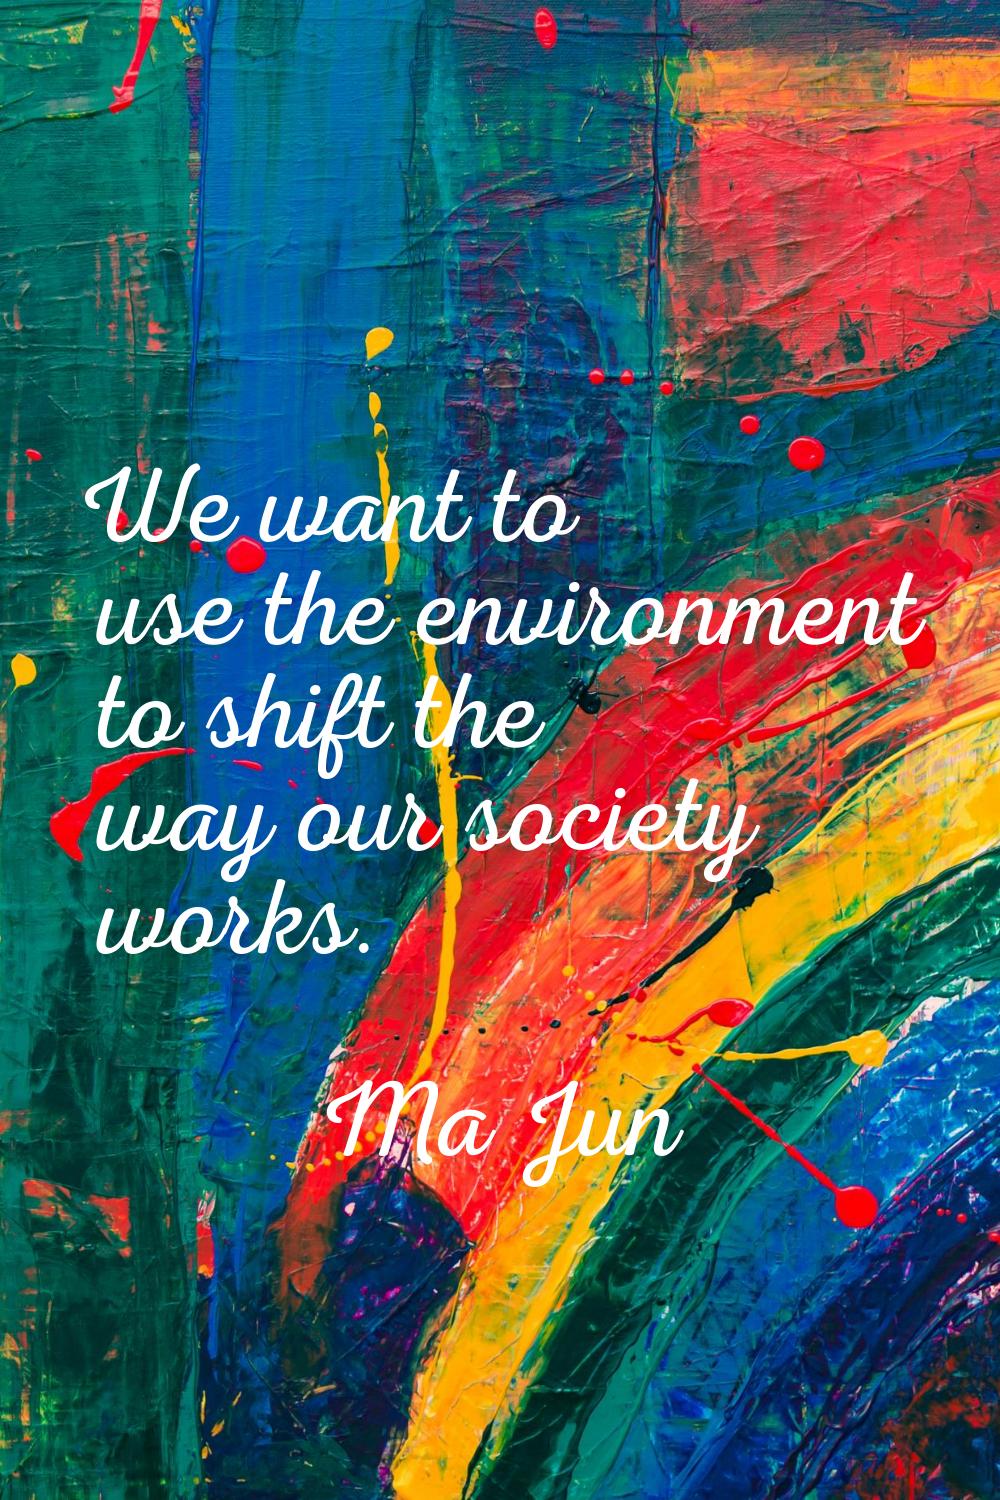 We want to use the environment to shift the way our society works.